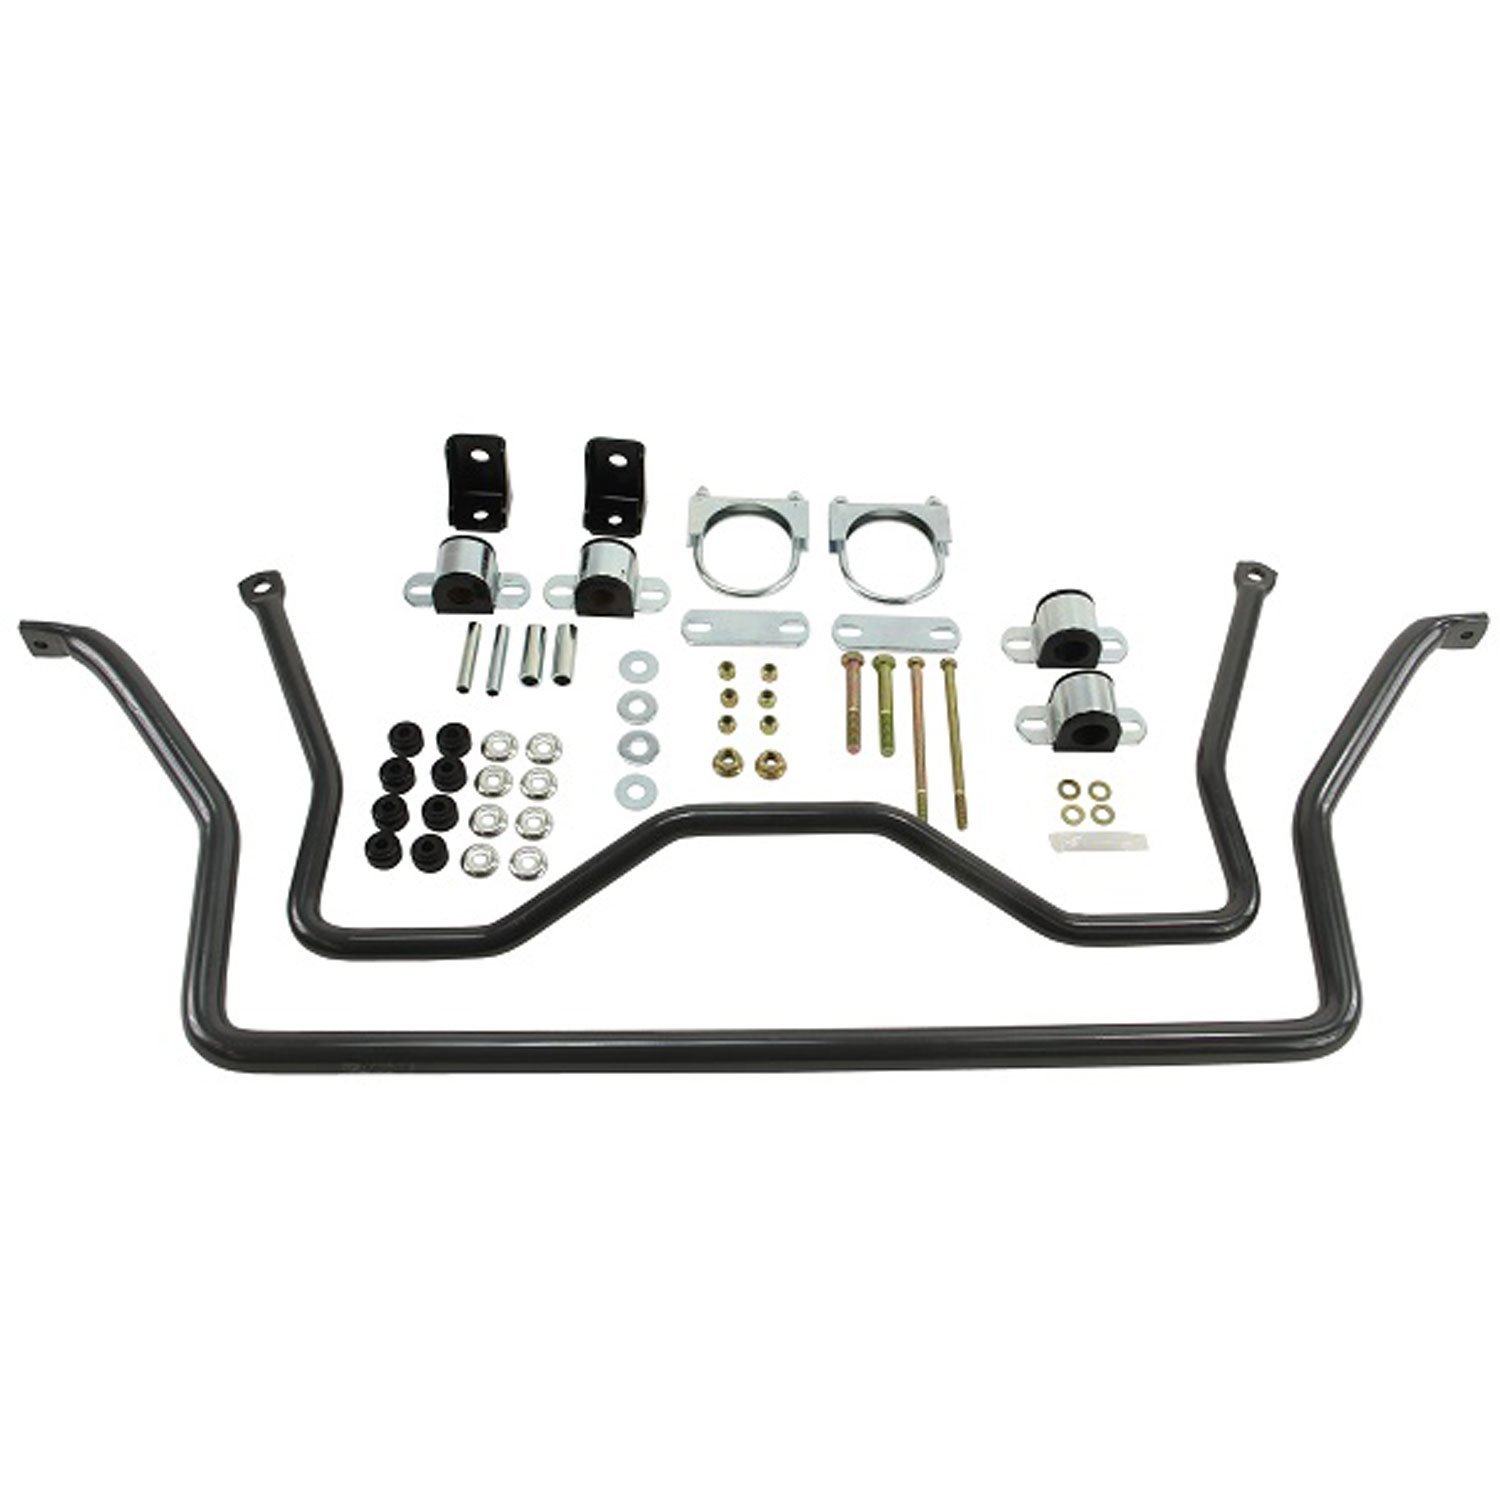 Front/Rear Sway Bar Kit for 2004-2012 Chevy Colorado/GMC Canyon